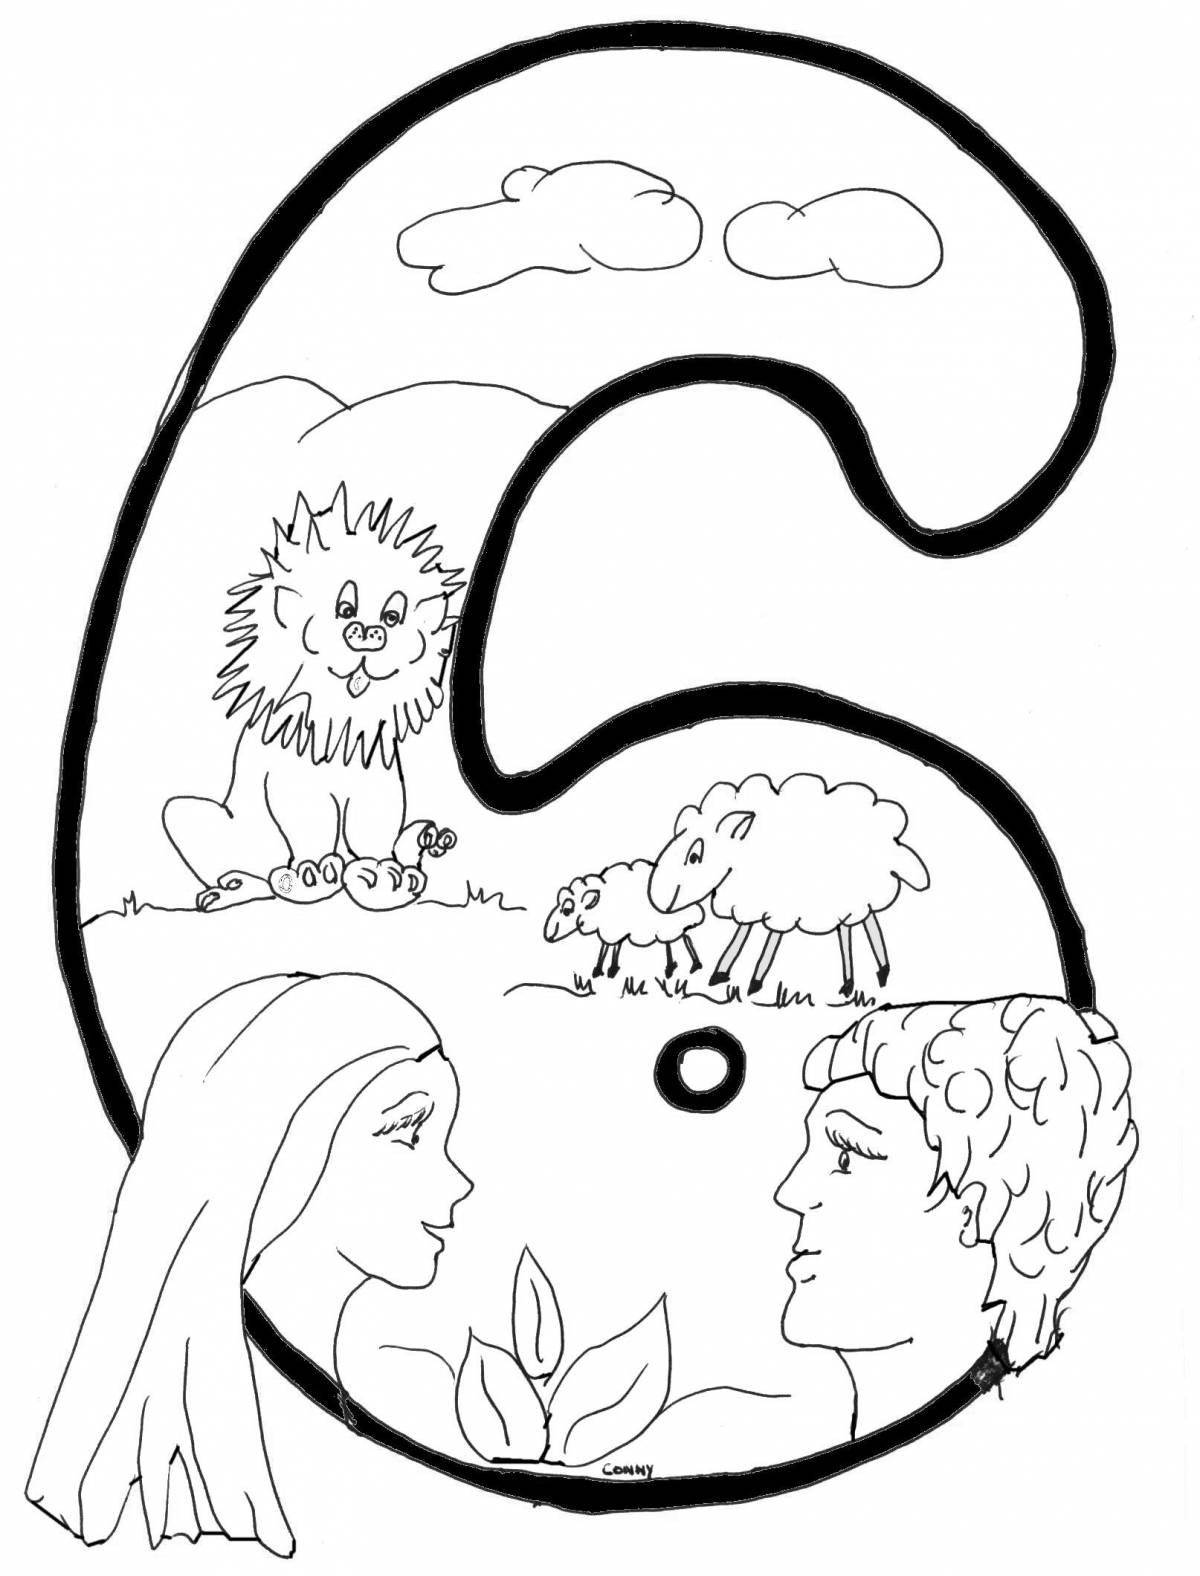 Coloring page grandiose creation of the world